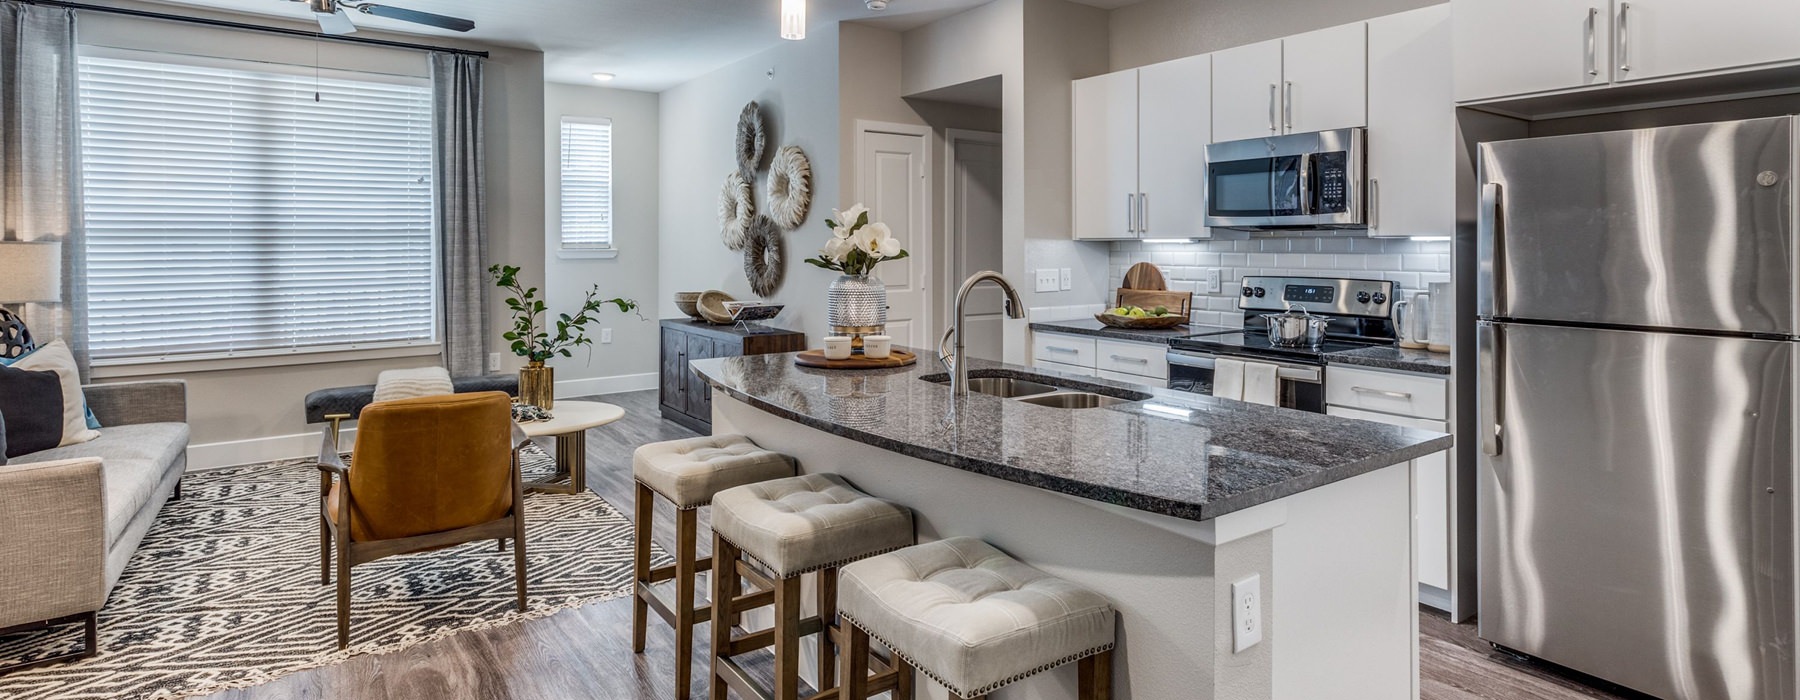 Living room and kitchen at our apartments in Allen, TX, featuring granite countertops and stainless steel appliances.